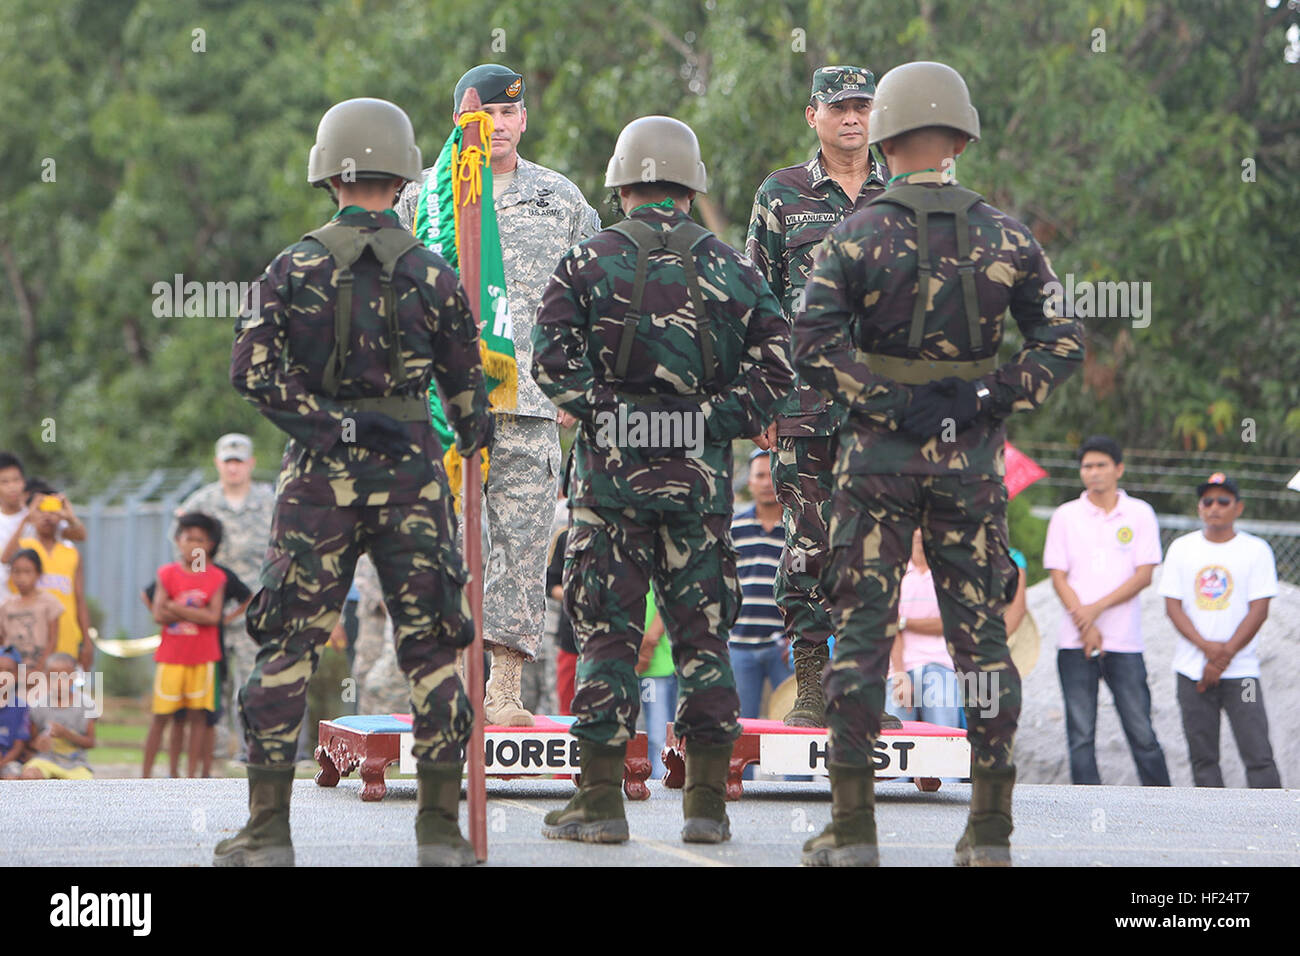 Philippine Army Col. Ronald Villanueva, top-right, chief-of-staff of 7th Infantry Division, and U.S. Army Col. Robert McDowell, top-left, commanding officer of Joint Special Operations Task Force - Philippines, address the color guard at a wreath-laying ceremony May 10 at the Pangatian War Memorial in Cabanatuan, Nueva Ecija, Philippines, during exercise Balikatan 2014. The ceremony honored Philippine and U.S. soldiers interred at the Cabanatuan Prison Camp, some of whom were liberated by Philippine guerrillas and the U.S. Army's 6th Ranger Battalion during a raid Jan. 30, 1945. Balikatan is a Stock Photo